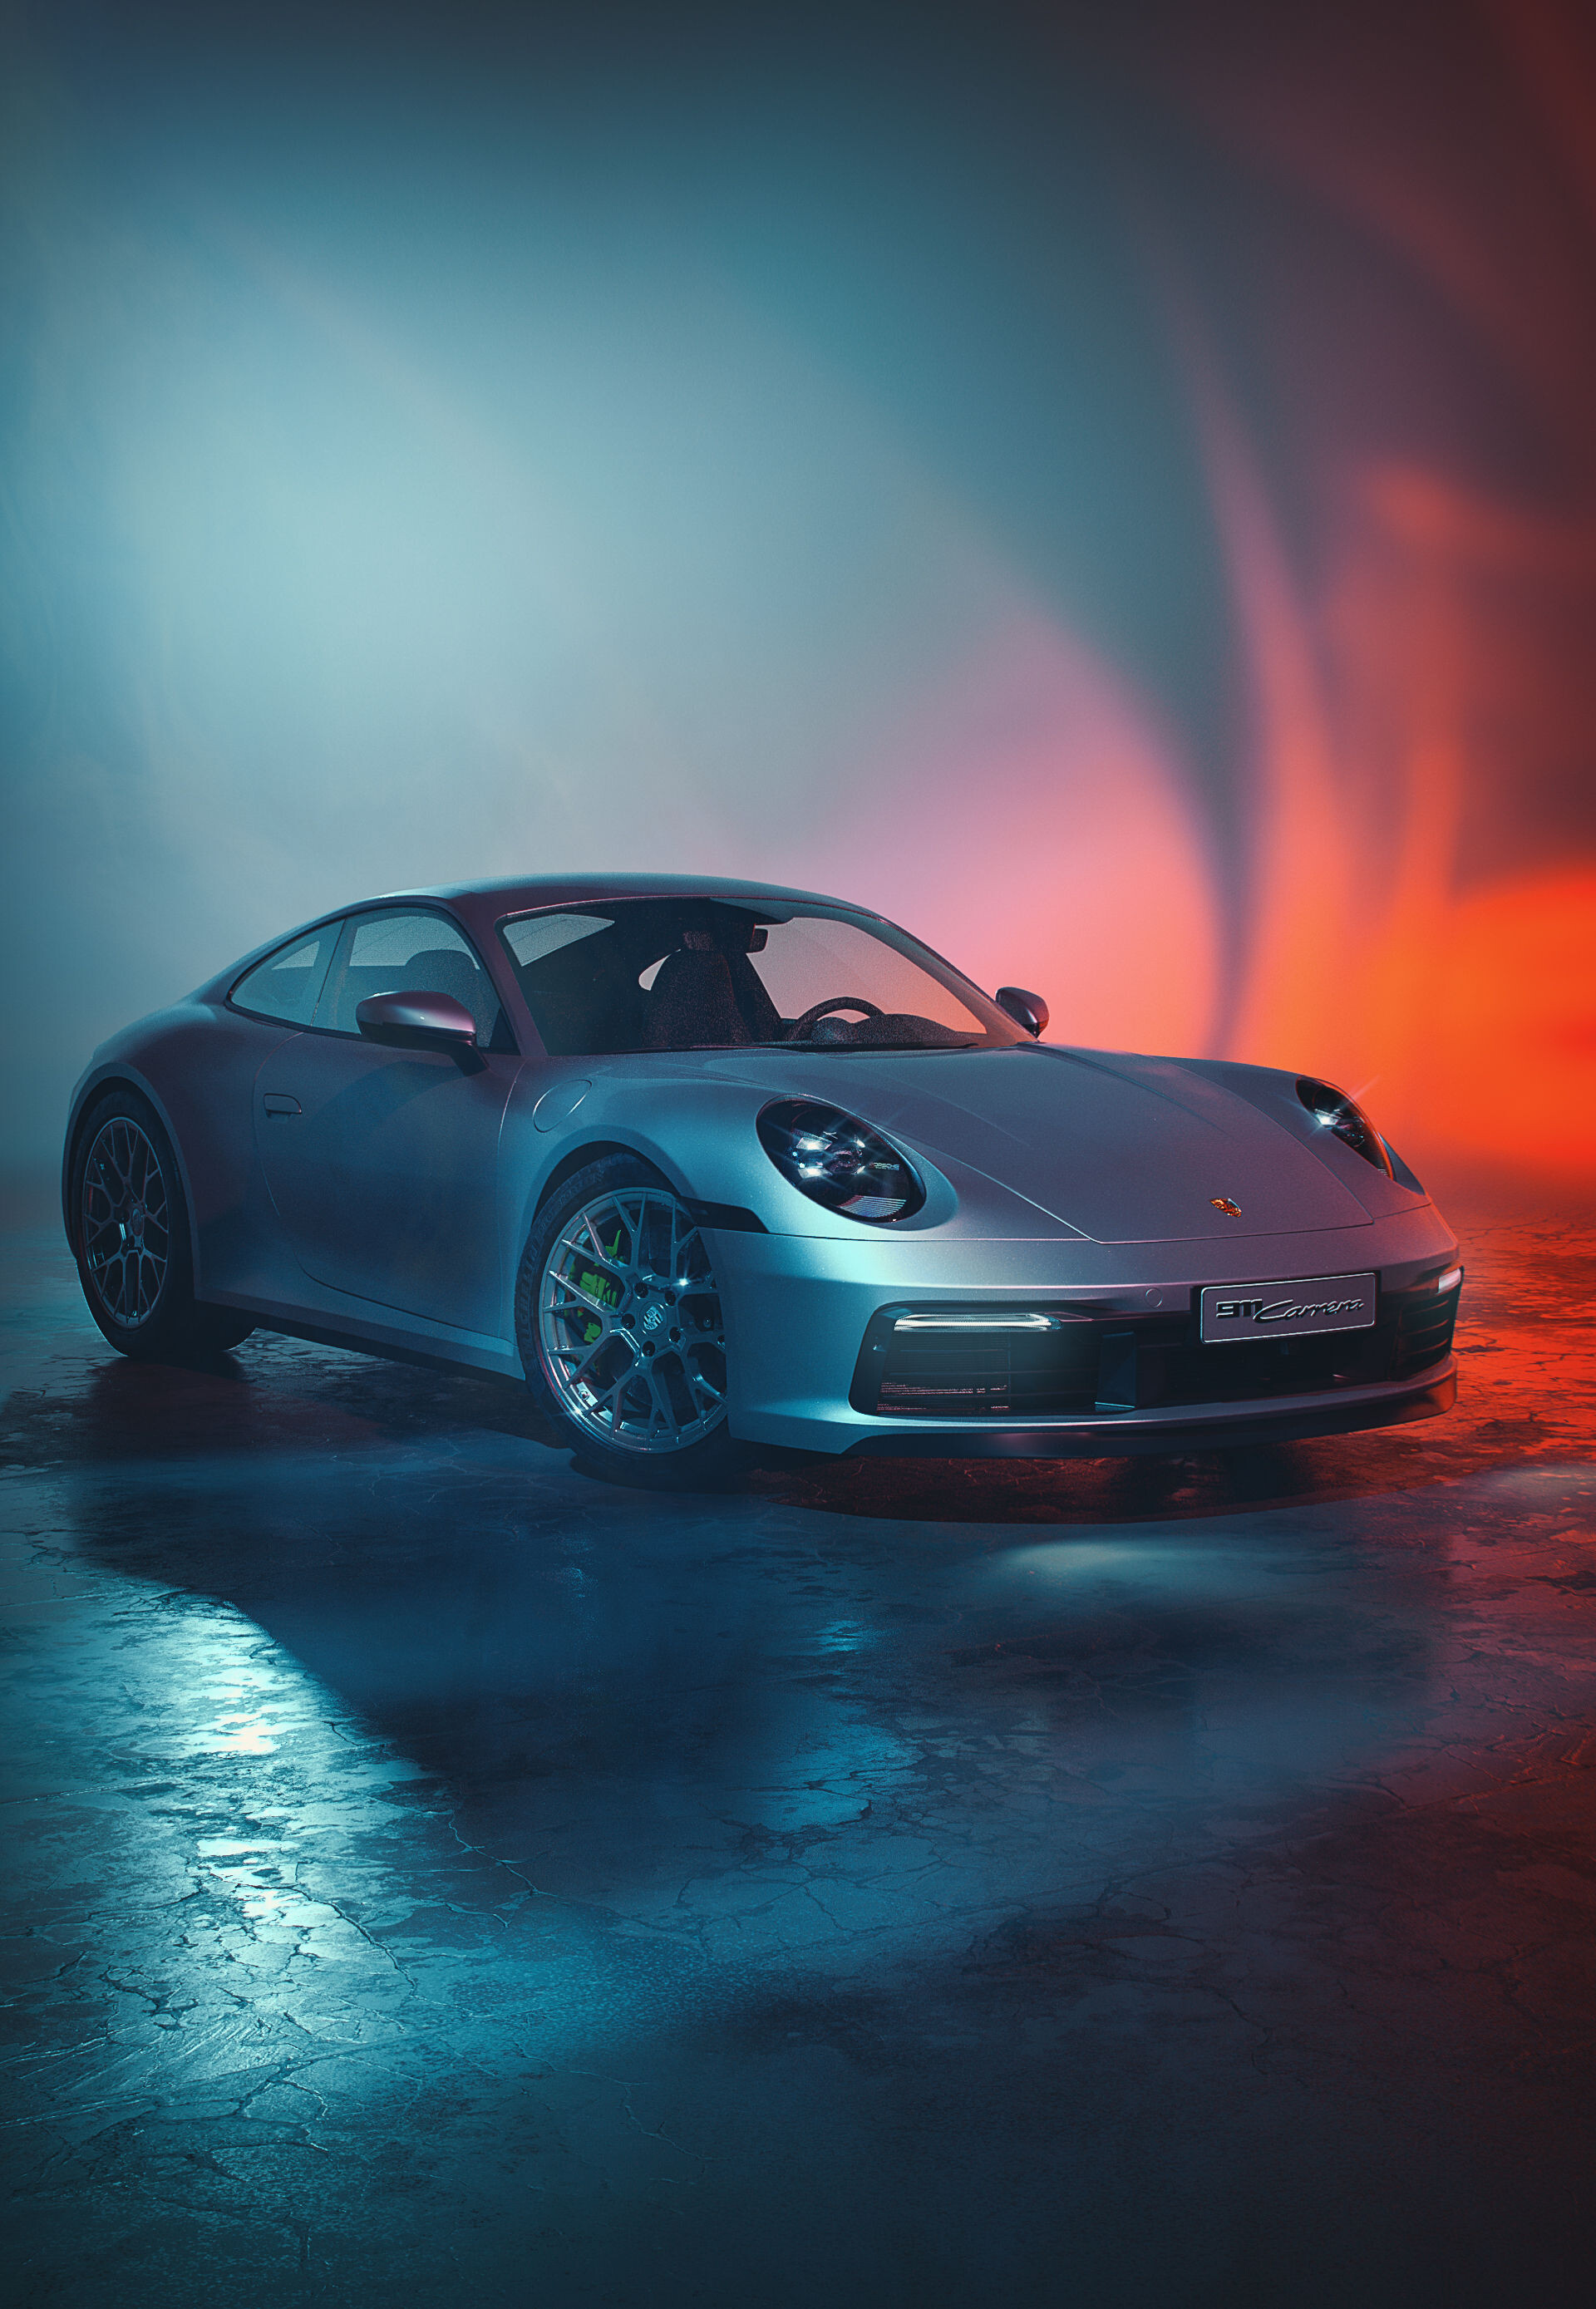 ArtStation - 2019 Porsche 911 Carrera 4S (Playing with lights and colors)